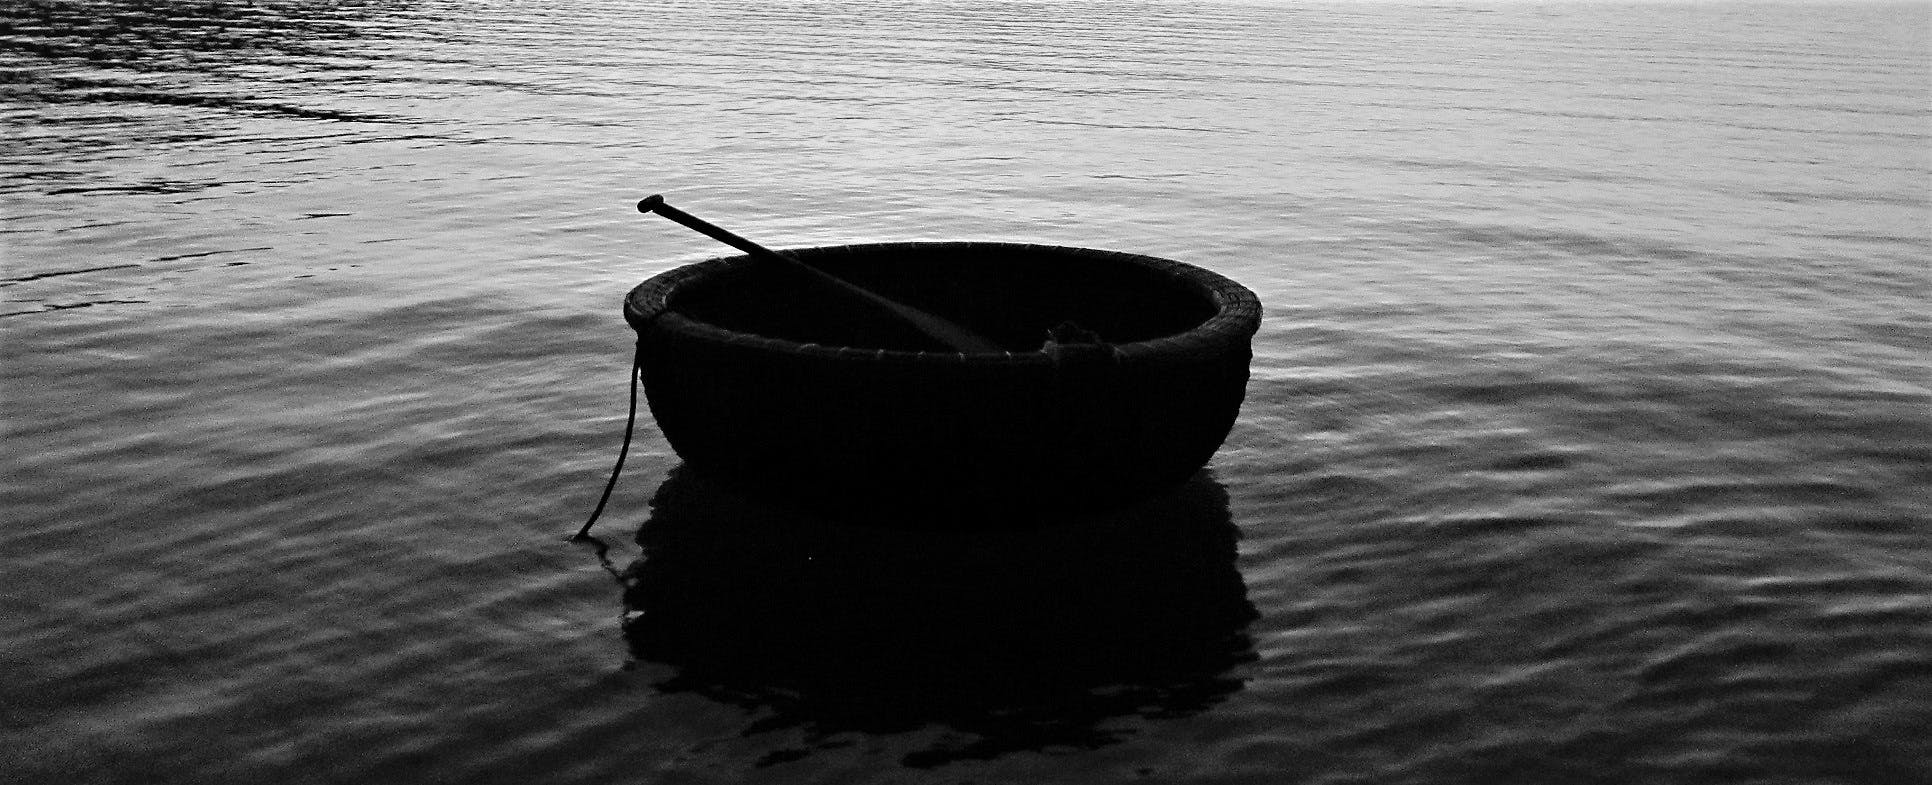 Vietnam Coracle on the Untold Pacific Podcast with James Bradley